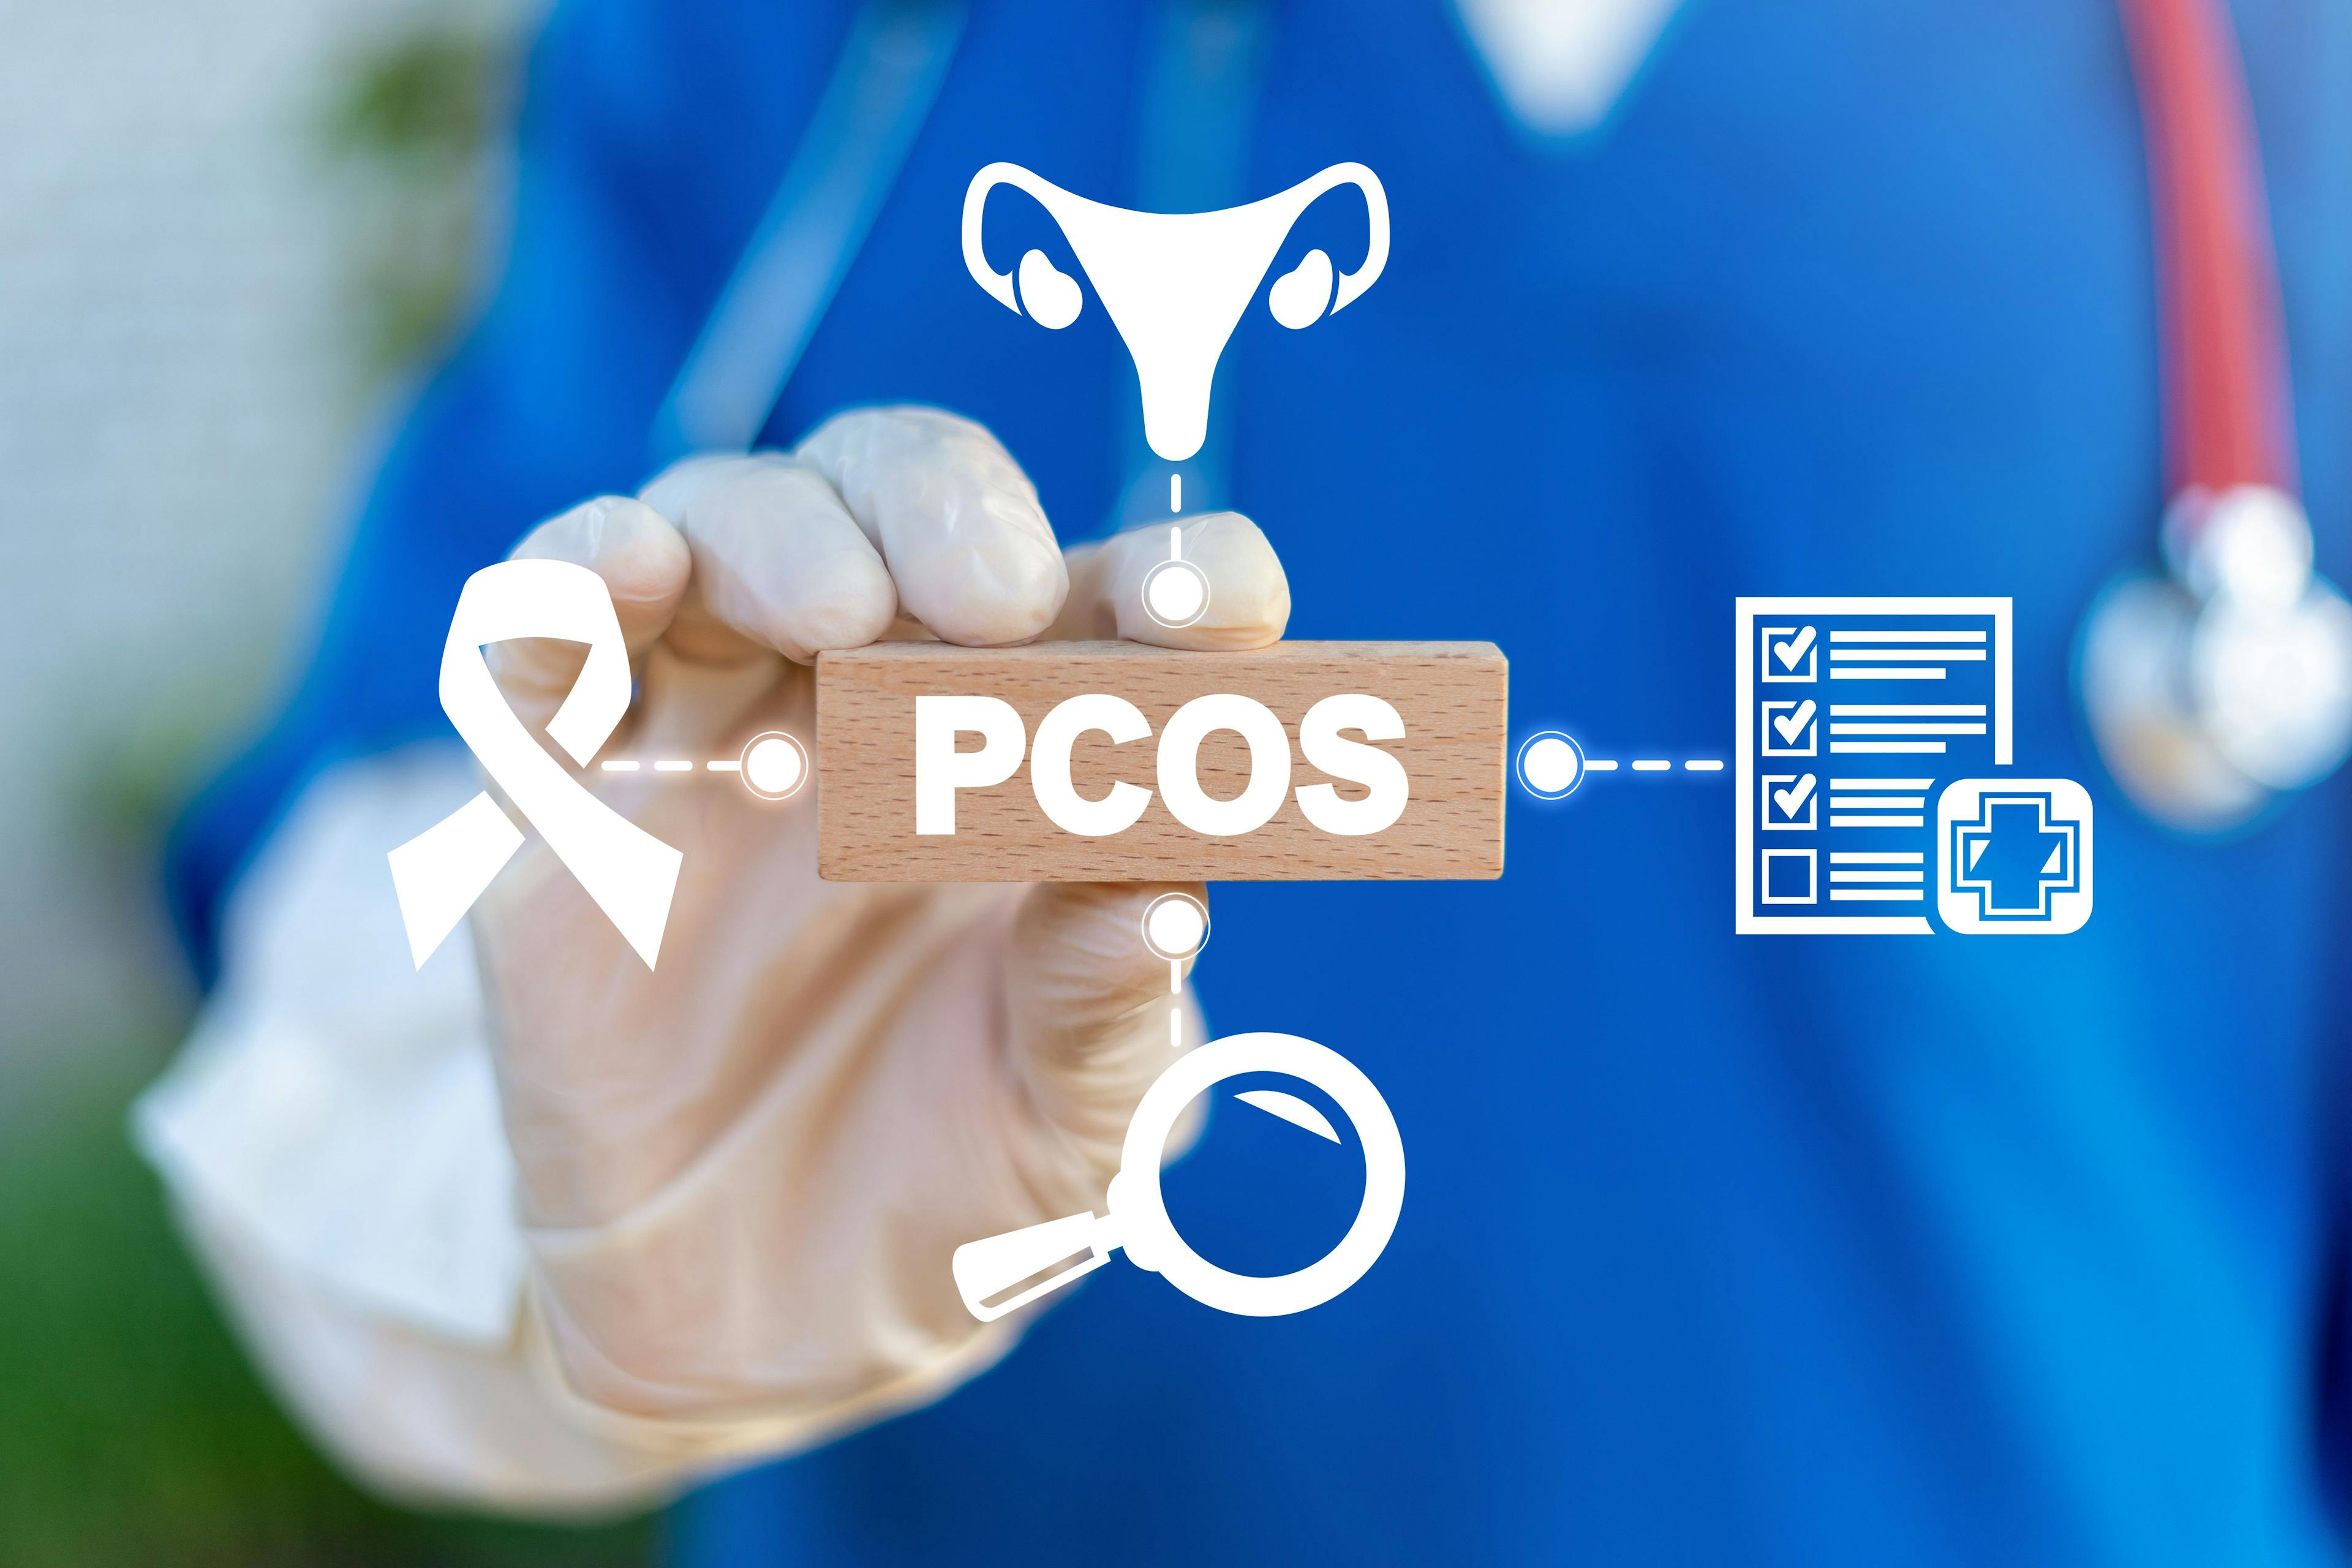 Polycystic Ovary Syndrome Associated with Higher Mortality Risk, According to New Research